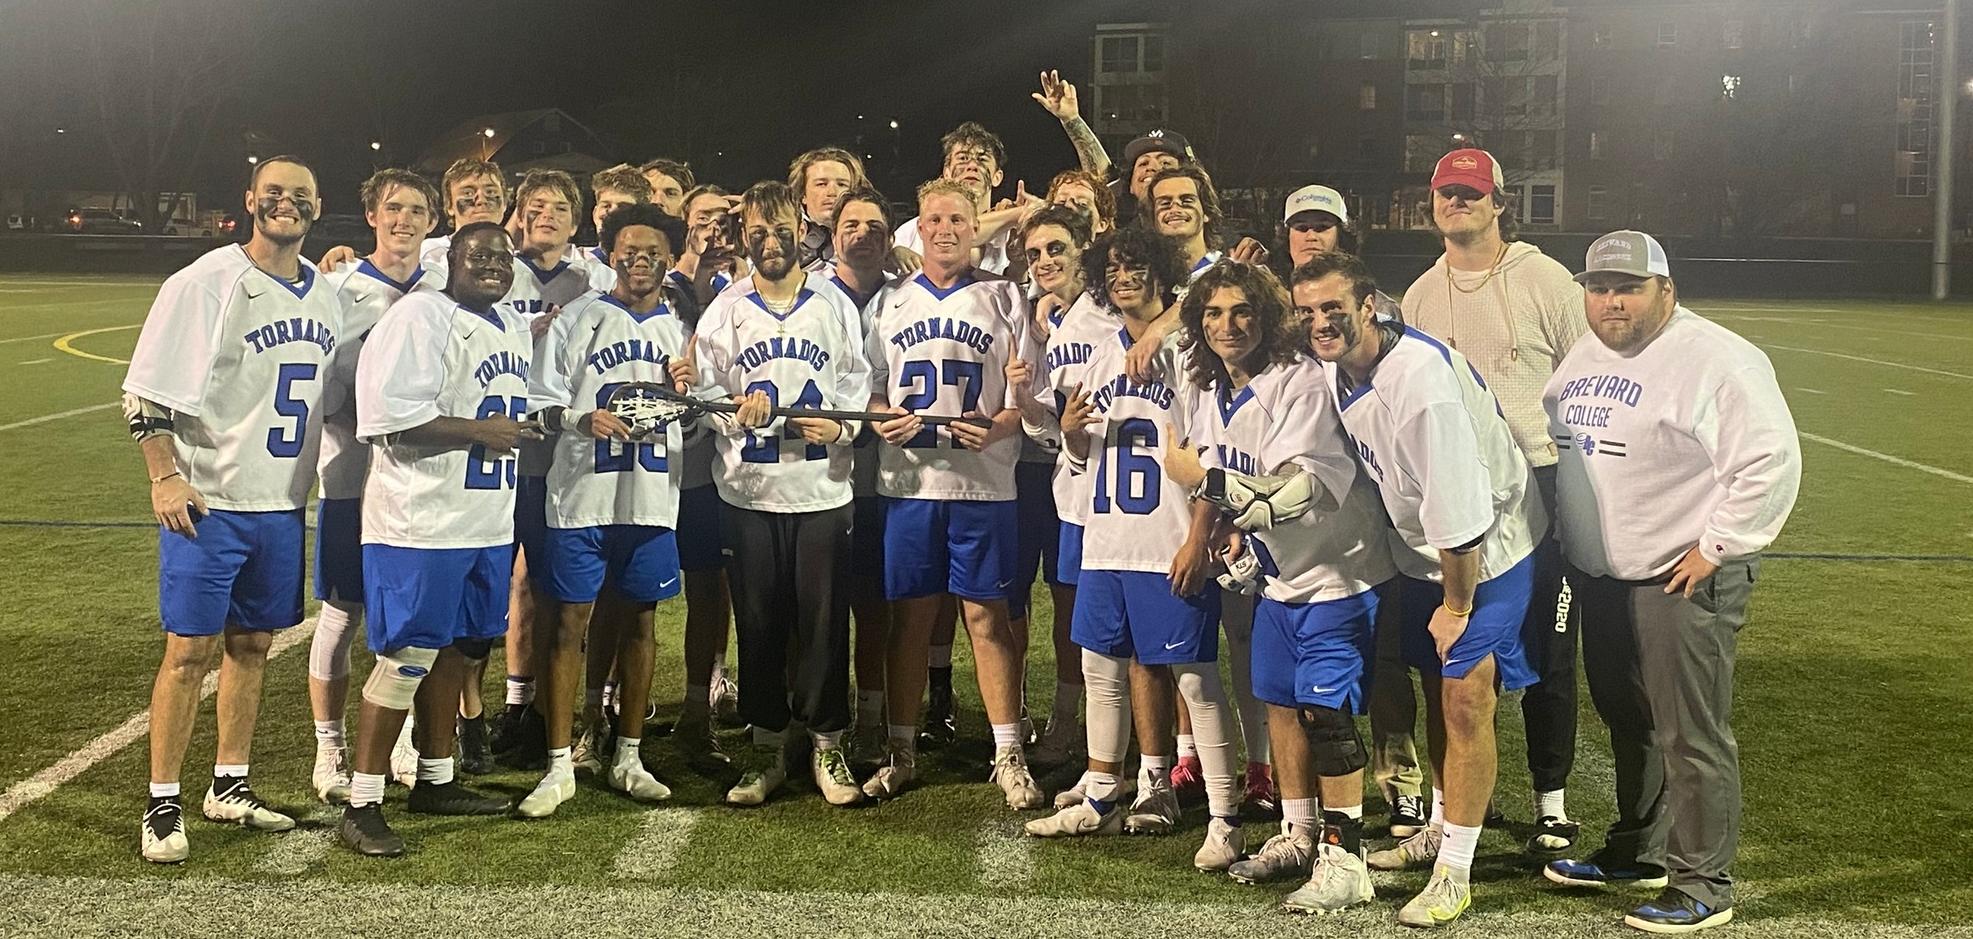 The Brevard College men's lacrosse team gathered with the Blue Ridge trophy following its 17-2 victory over Warren Wilson.